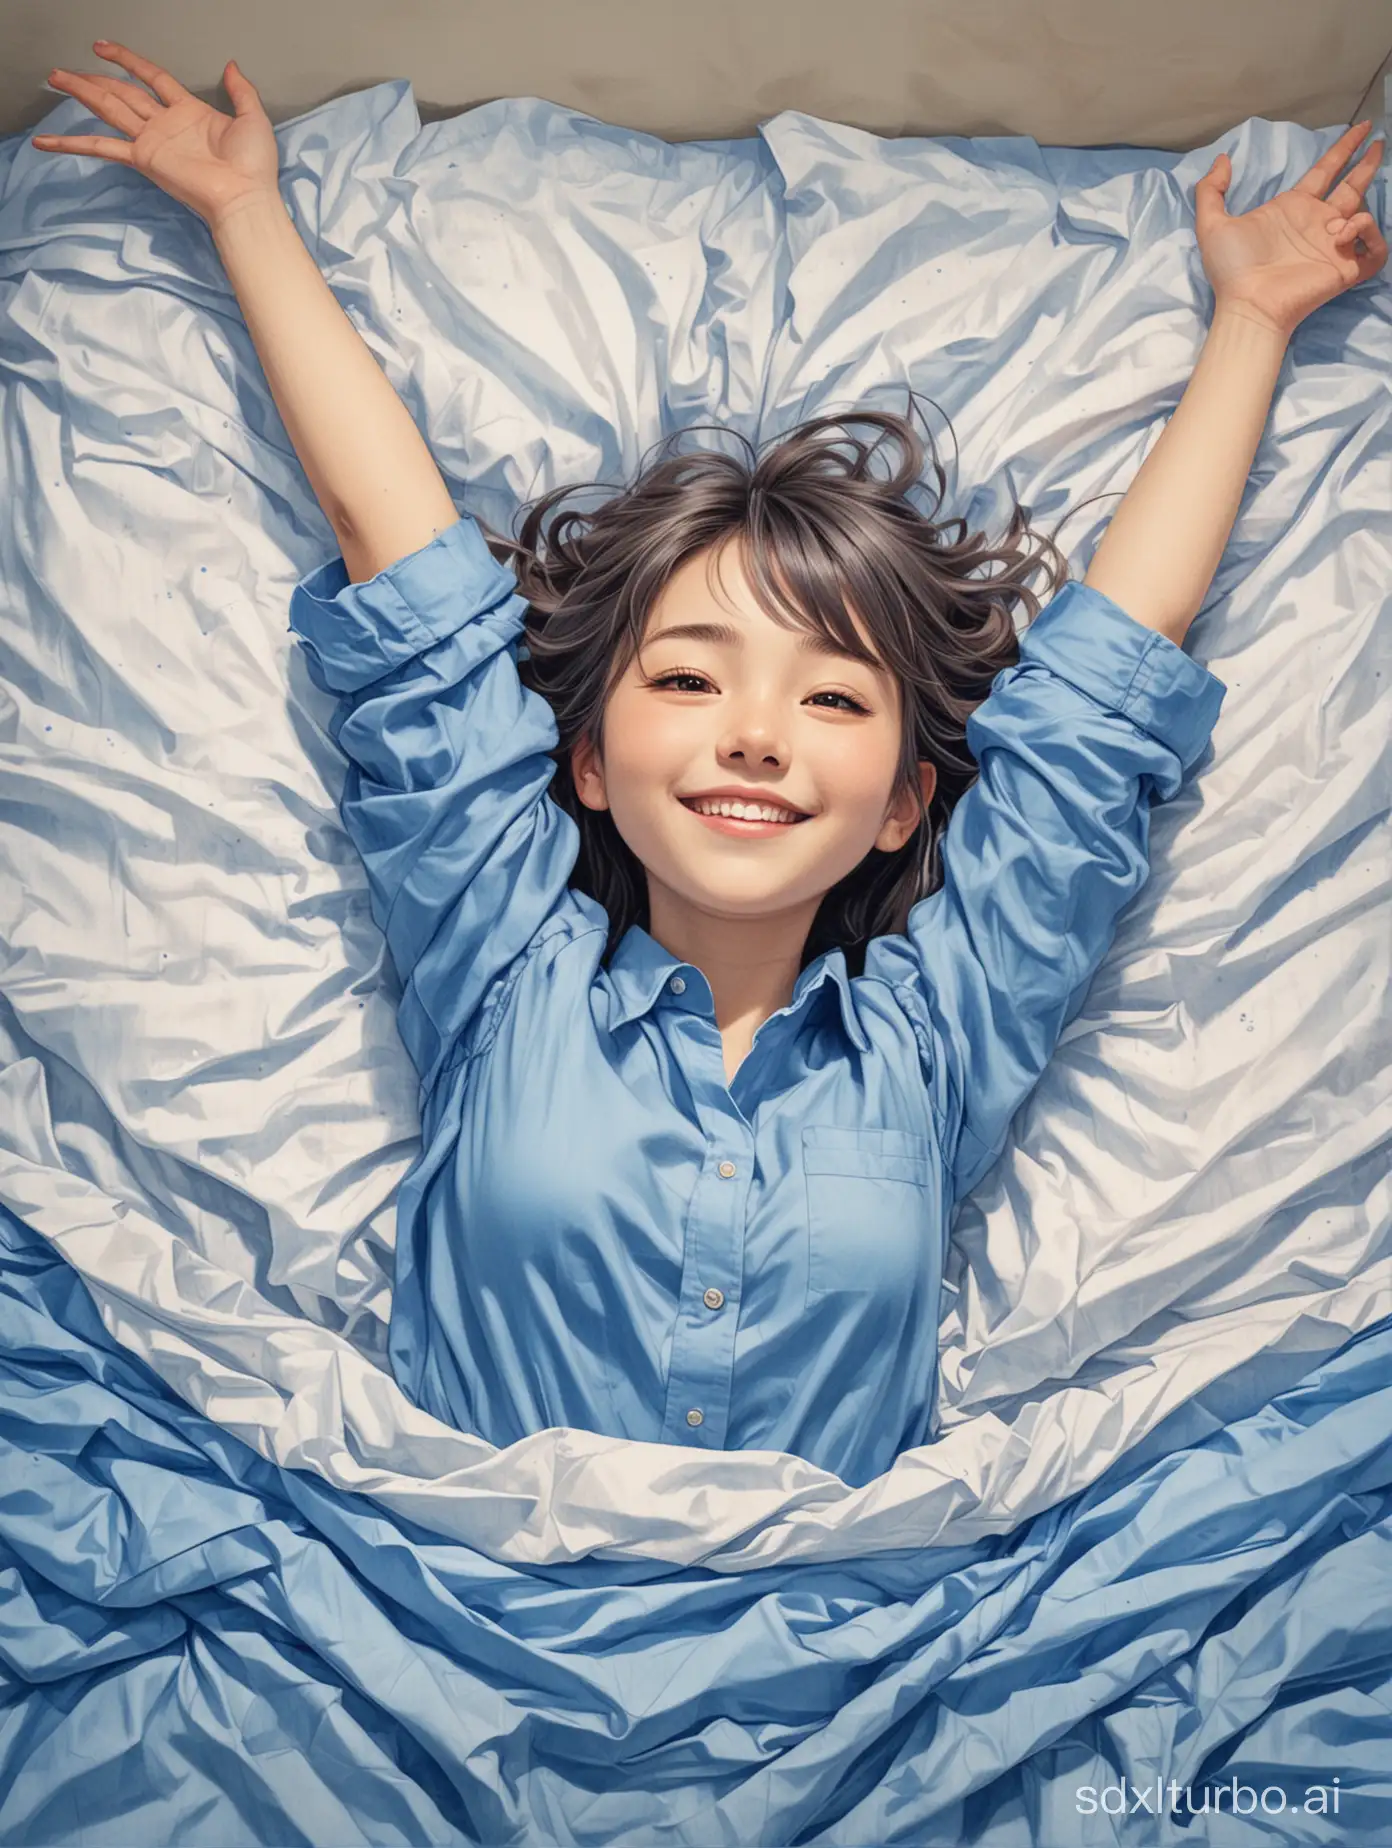 Create a Japanese anime style drawing of girl lying on a bed with their arms stretched out above their head. the is wearing a blue shirt, and the crumpled sheets surrounding them have an artistic, painted texture in shades of blue and white. The girl is smiling